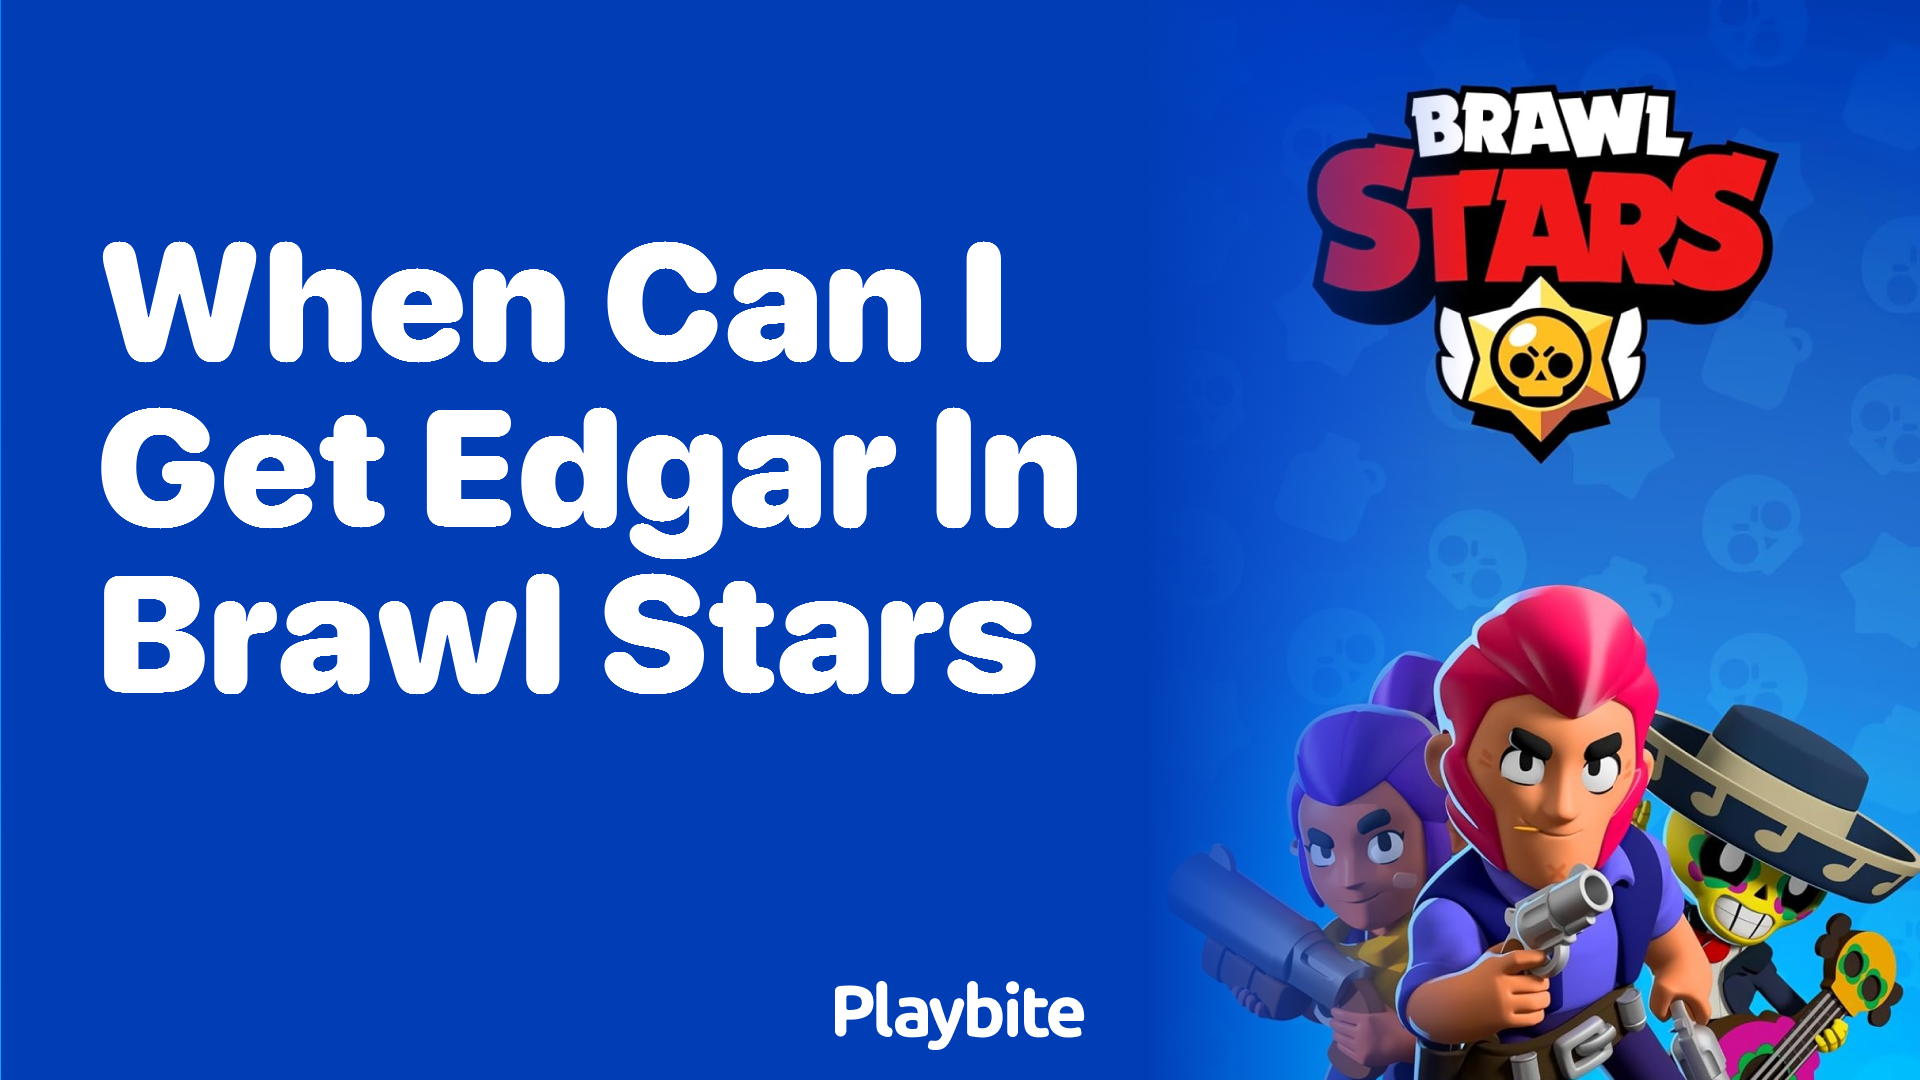 When Can I Get Edgar in Brawl Stars? Here's What You Need to Know